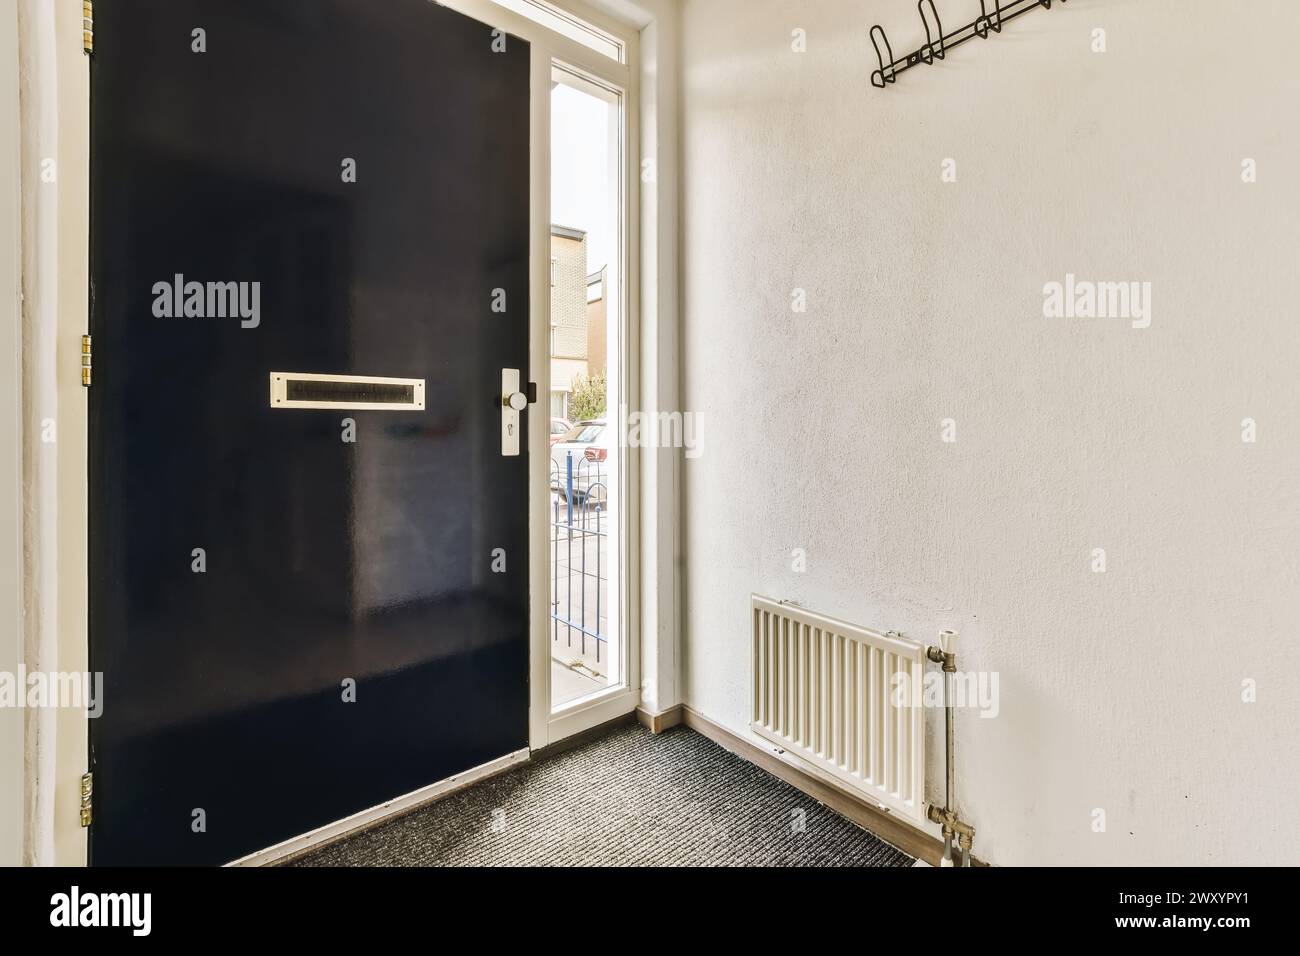 An inviting residential entryway with the front door open, showcasing a view of the street and coat hooks on the wall. Stock Photo